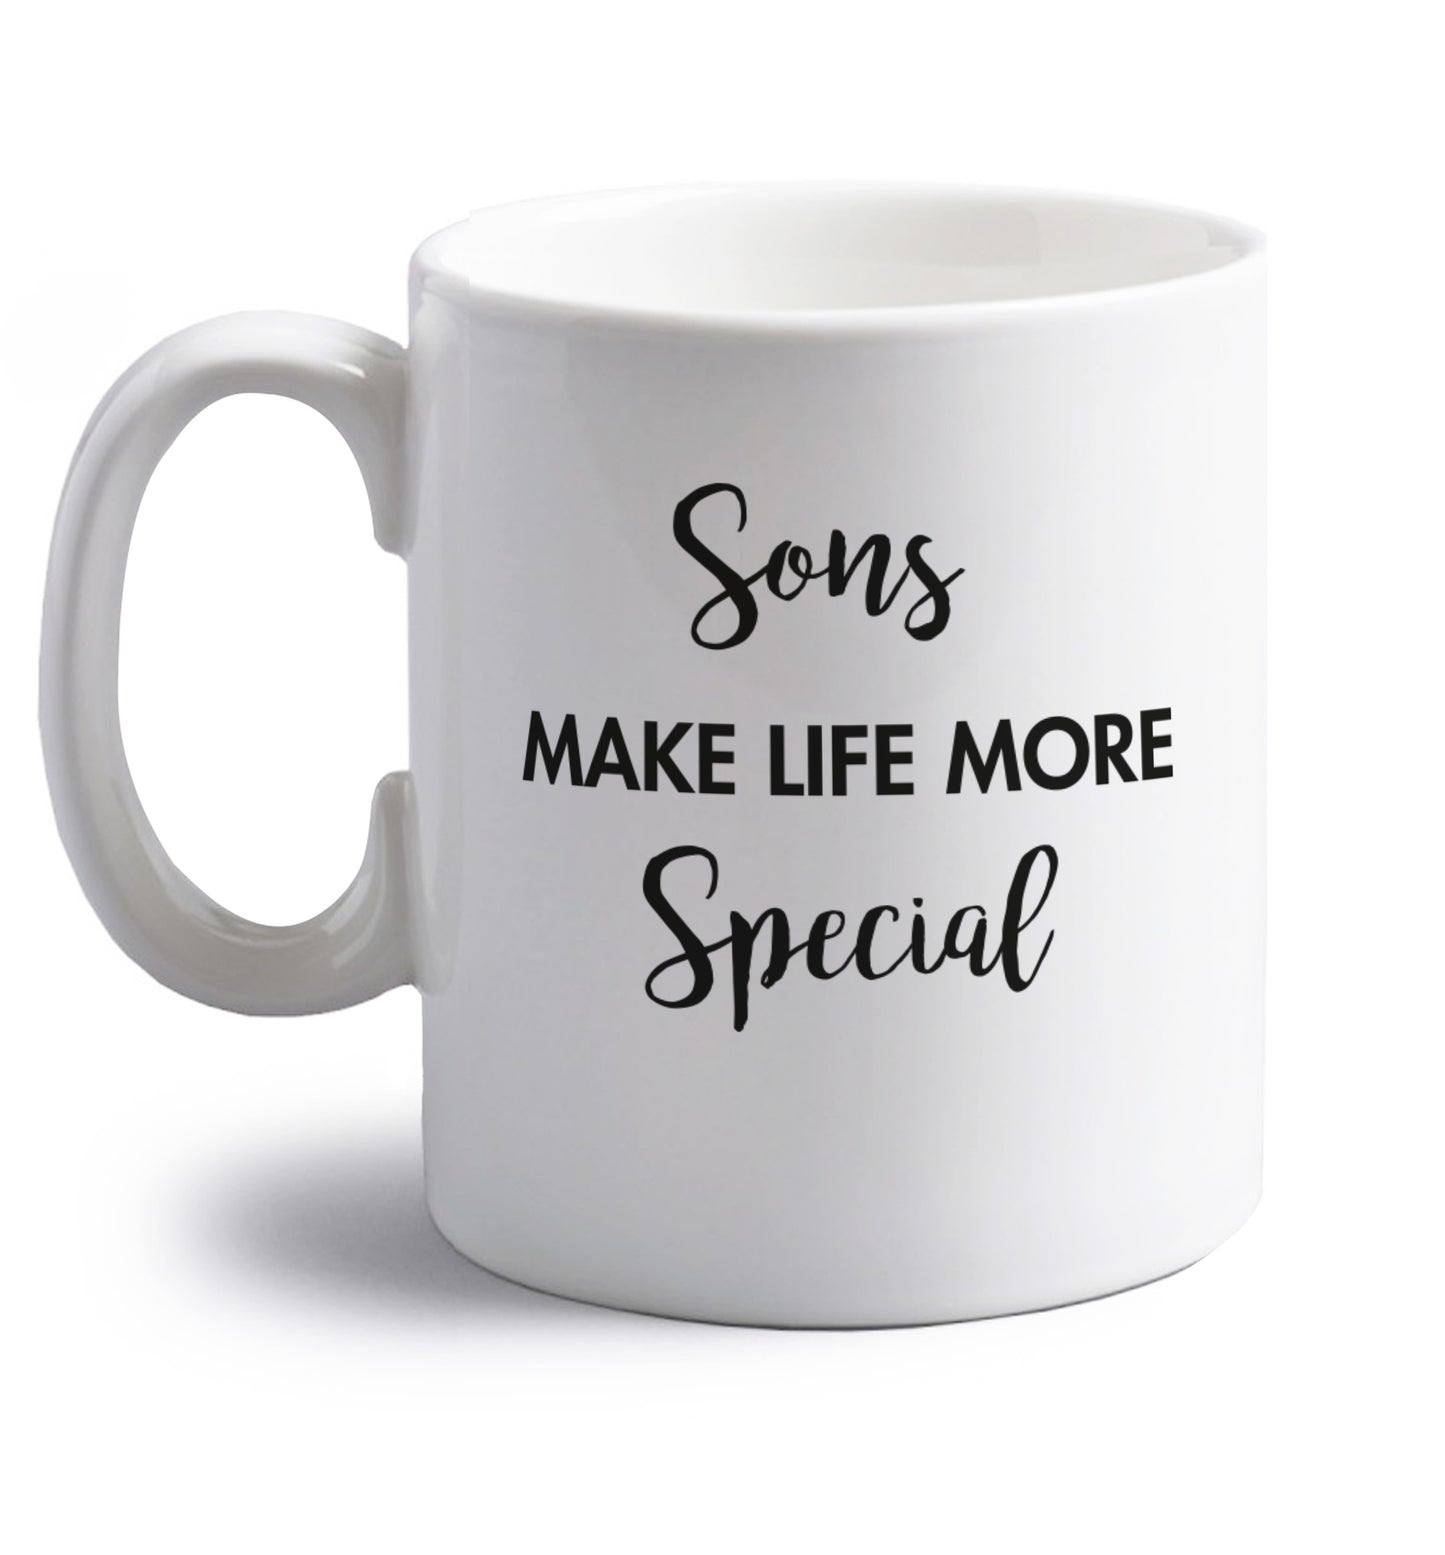 Daughters make life more special right handed white ceramic mug 